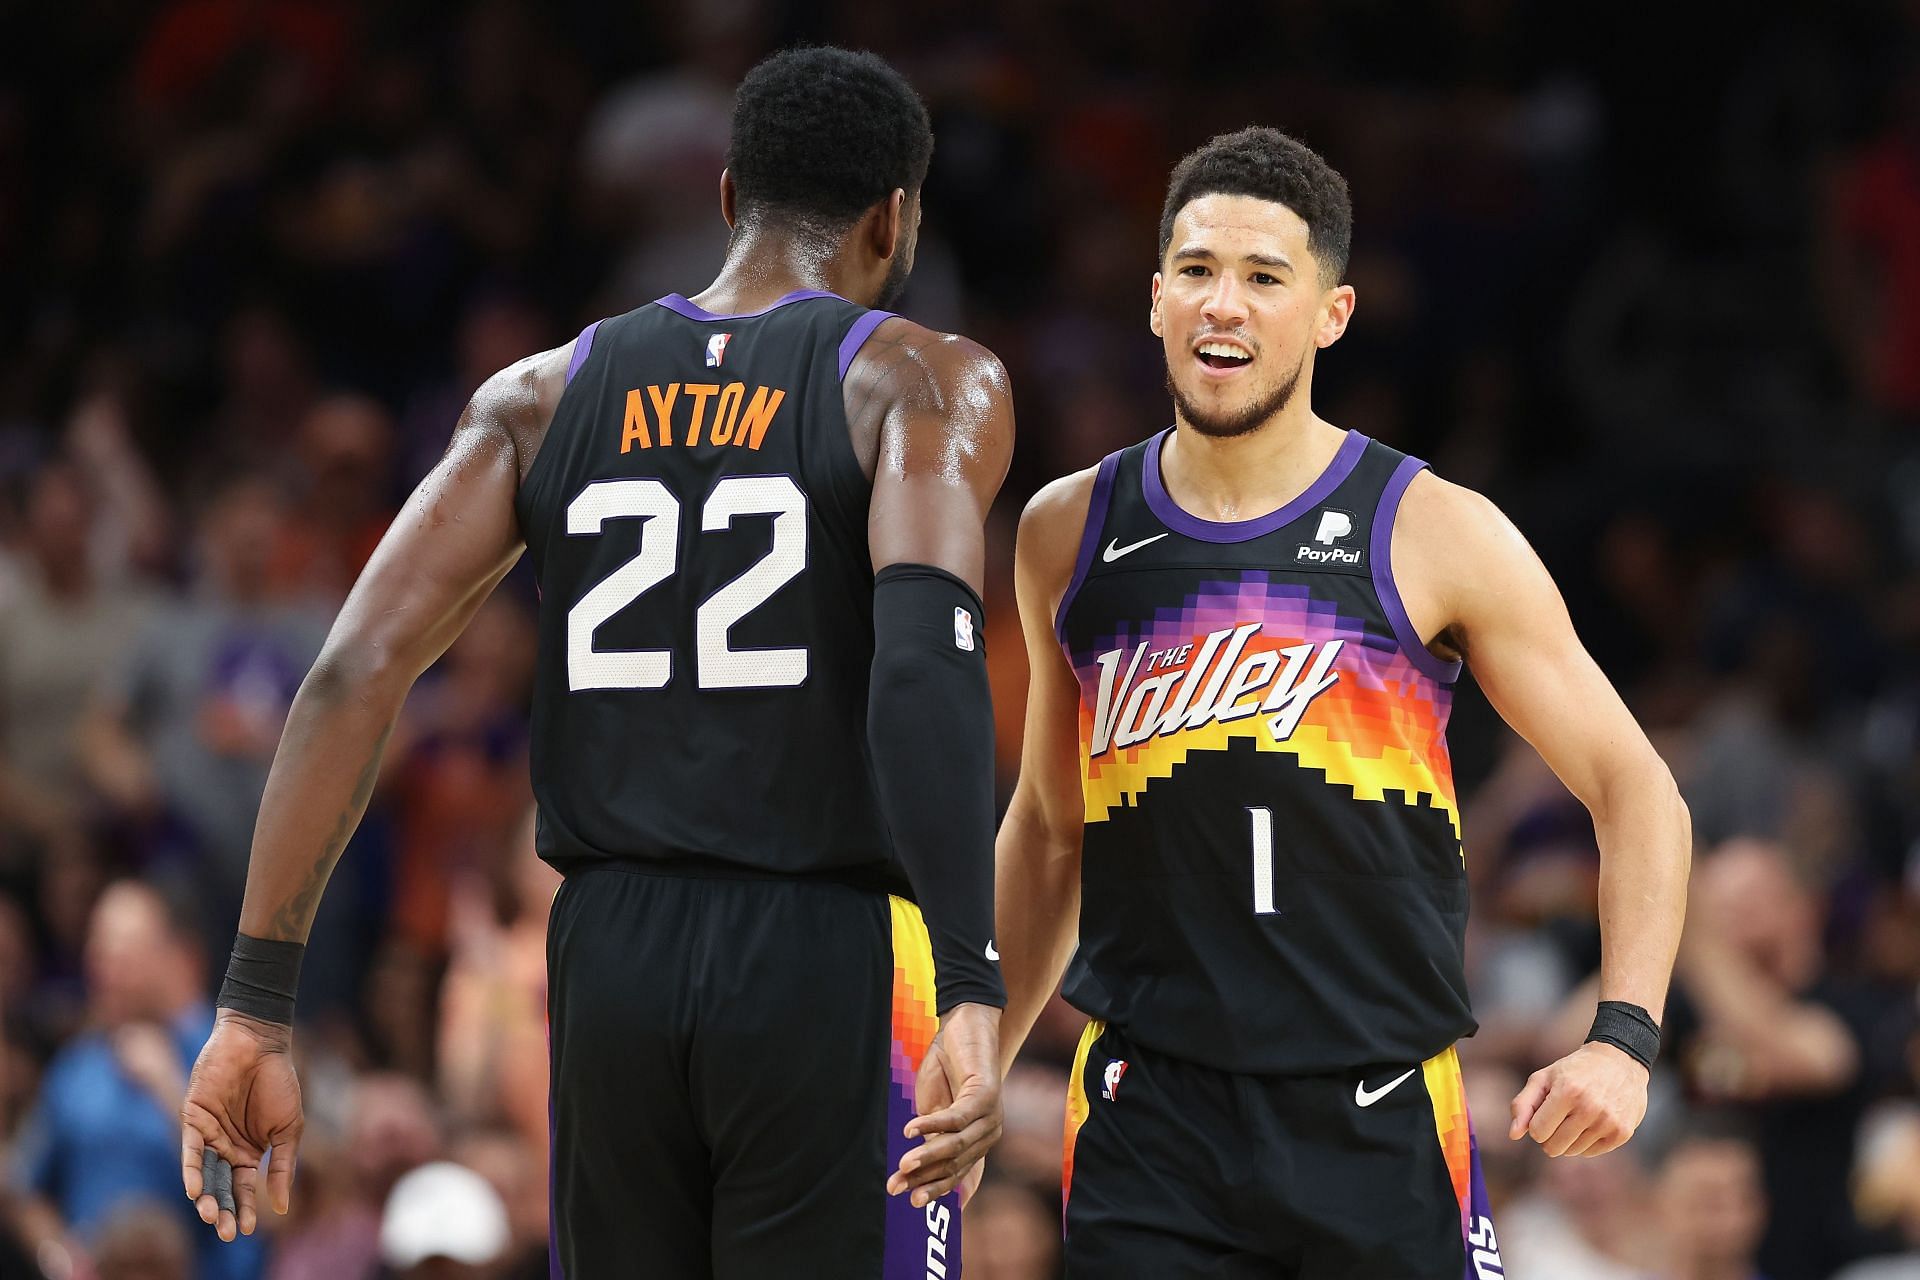 Deandre Ayton and Devin Booker celebrate a play.